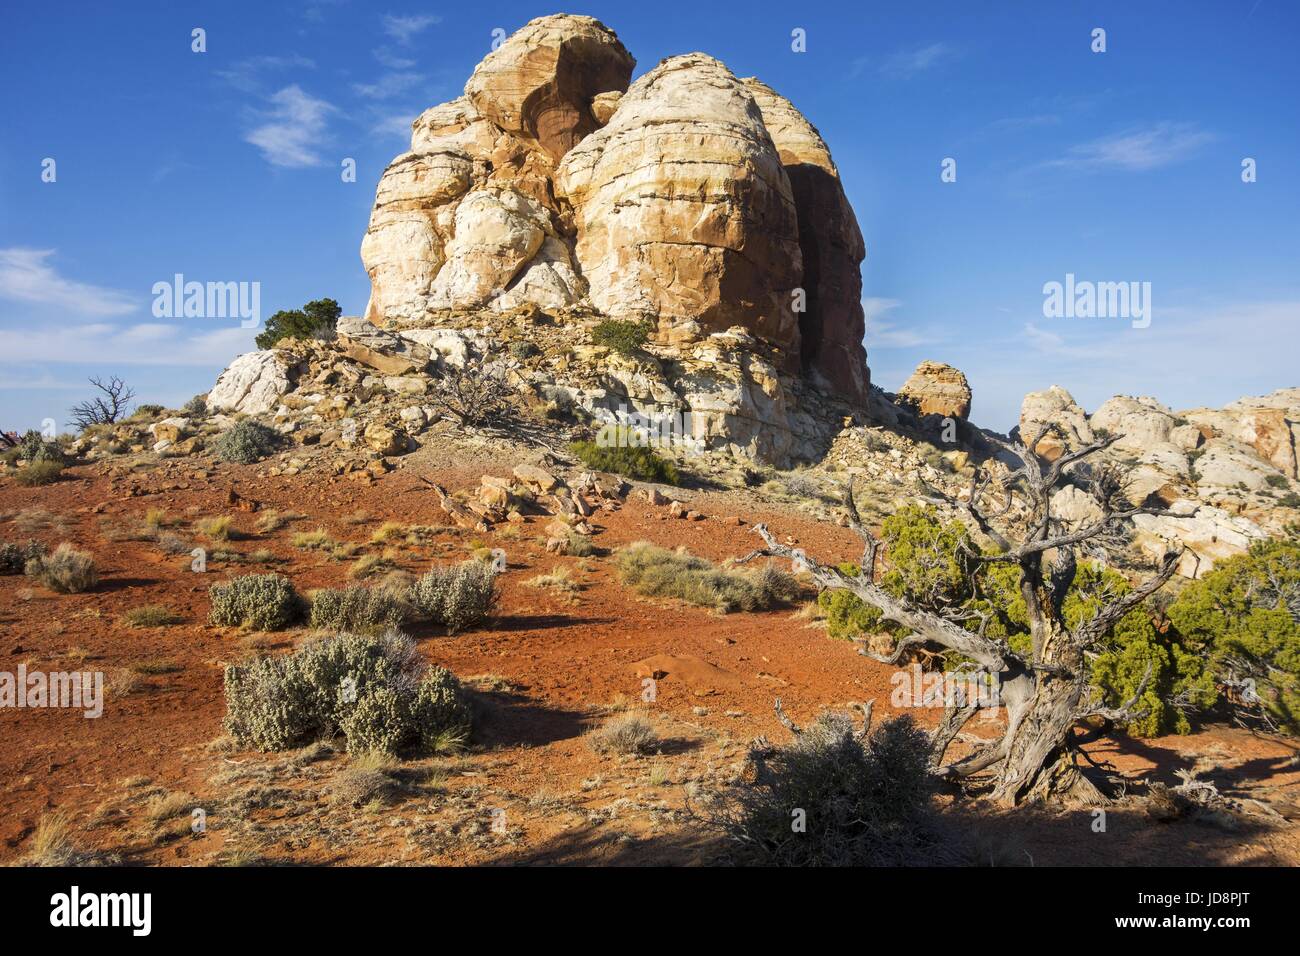 Navajo Knobs Rock Formation Landscape against Blue Sky Background at end of Hiking Trail in Capitol Reef National Park Utah United States Stock Photo